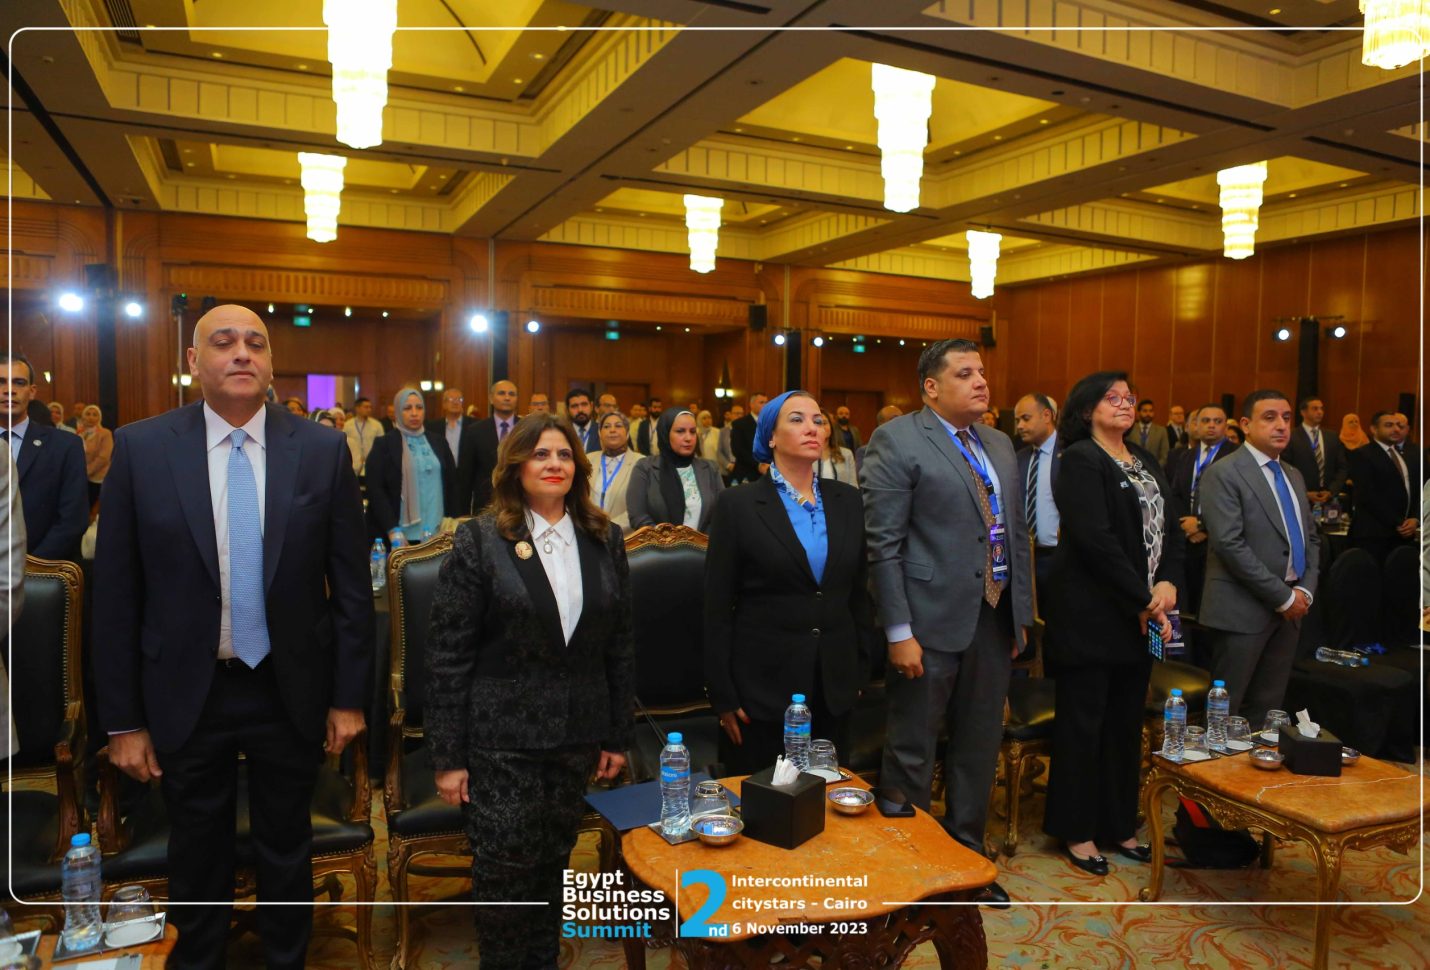 2nd Egypt Business Solutions Summit kicks off with participation of environment, emigration ministers